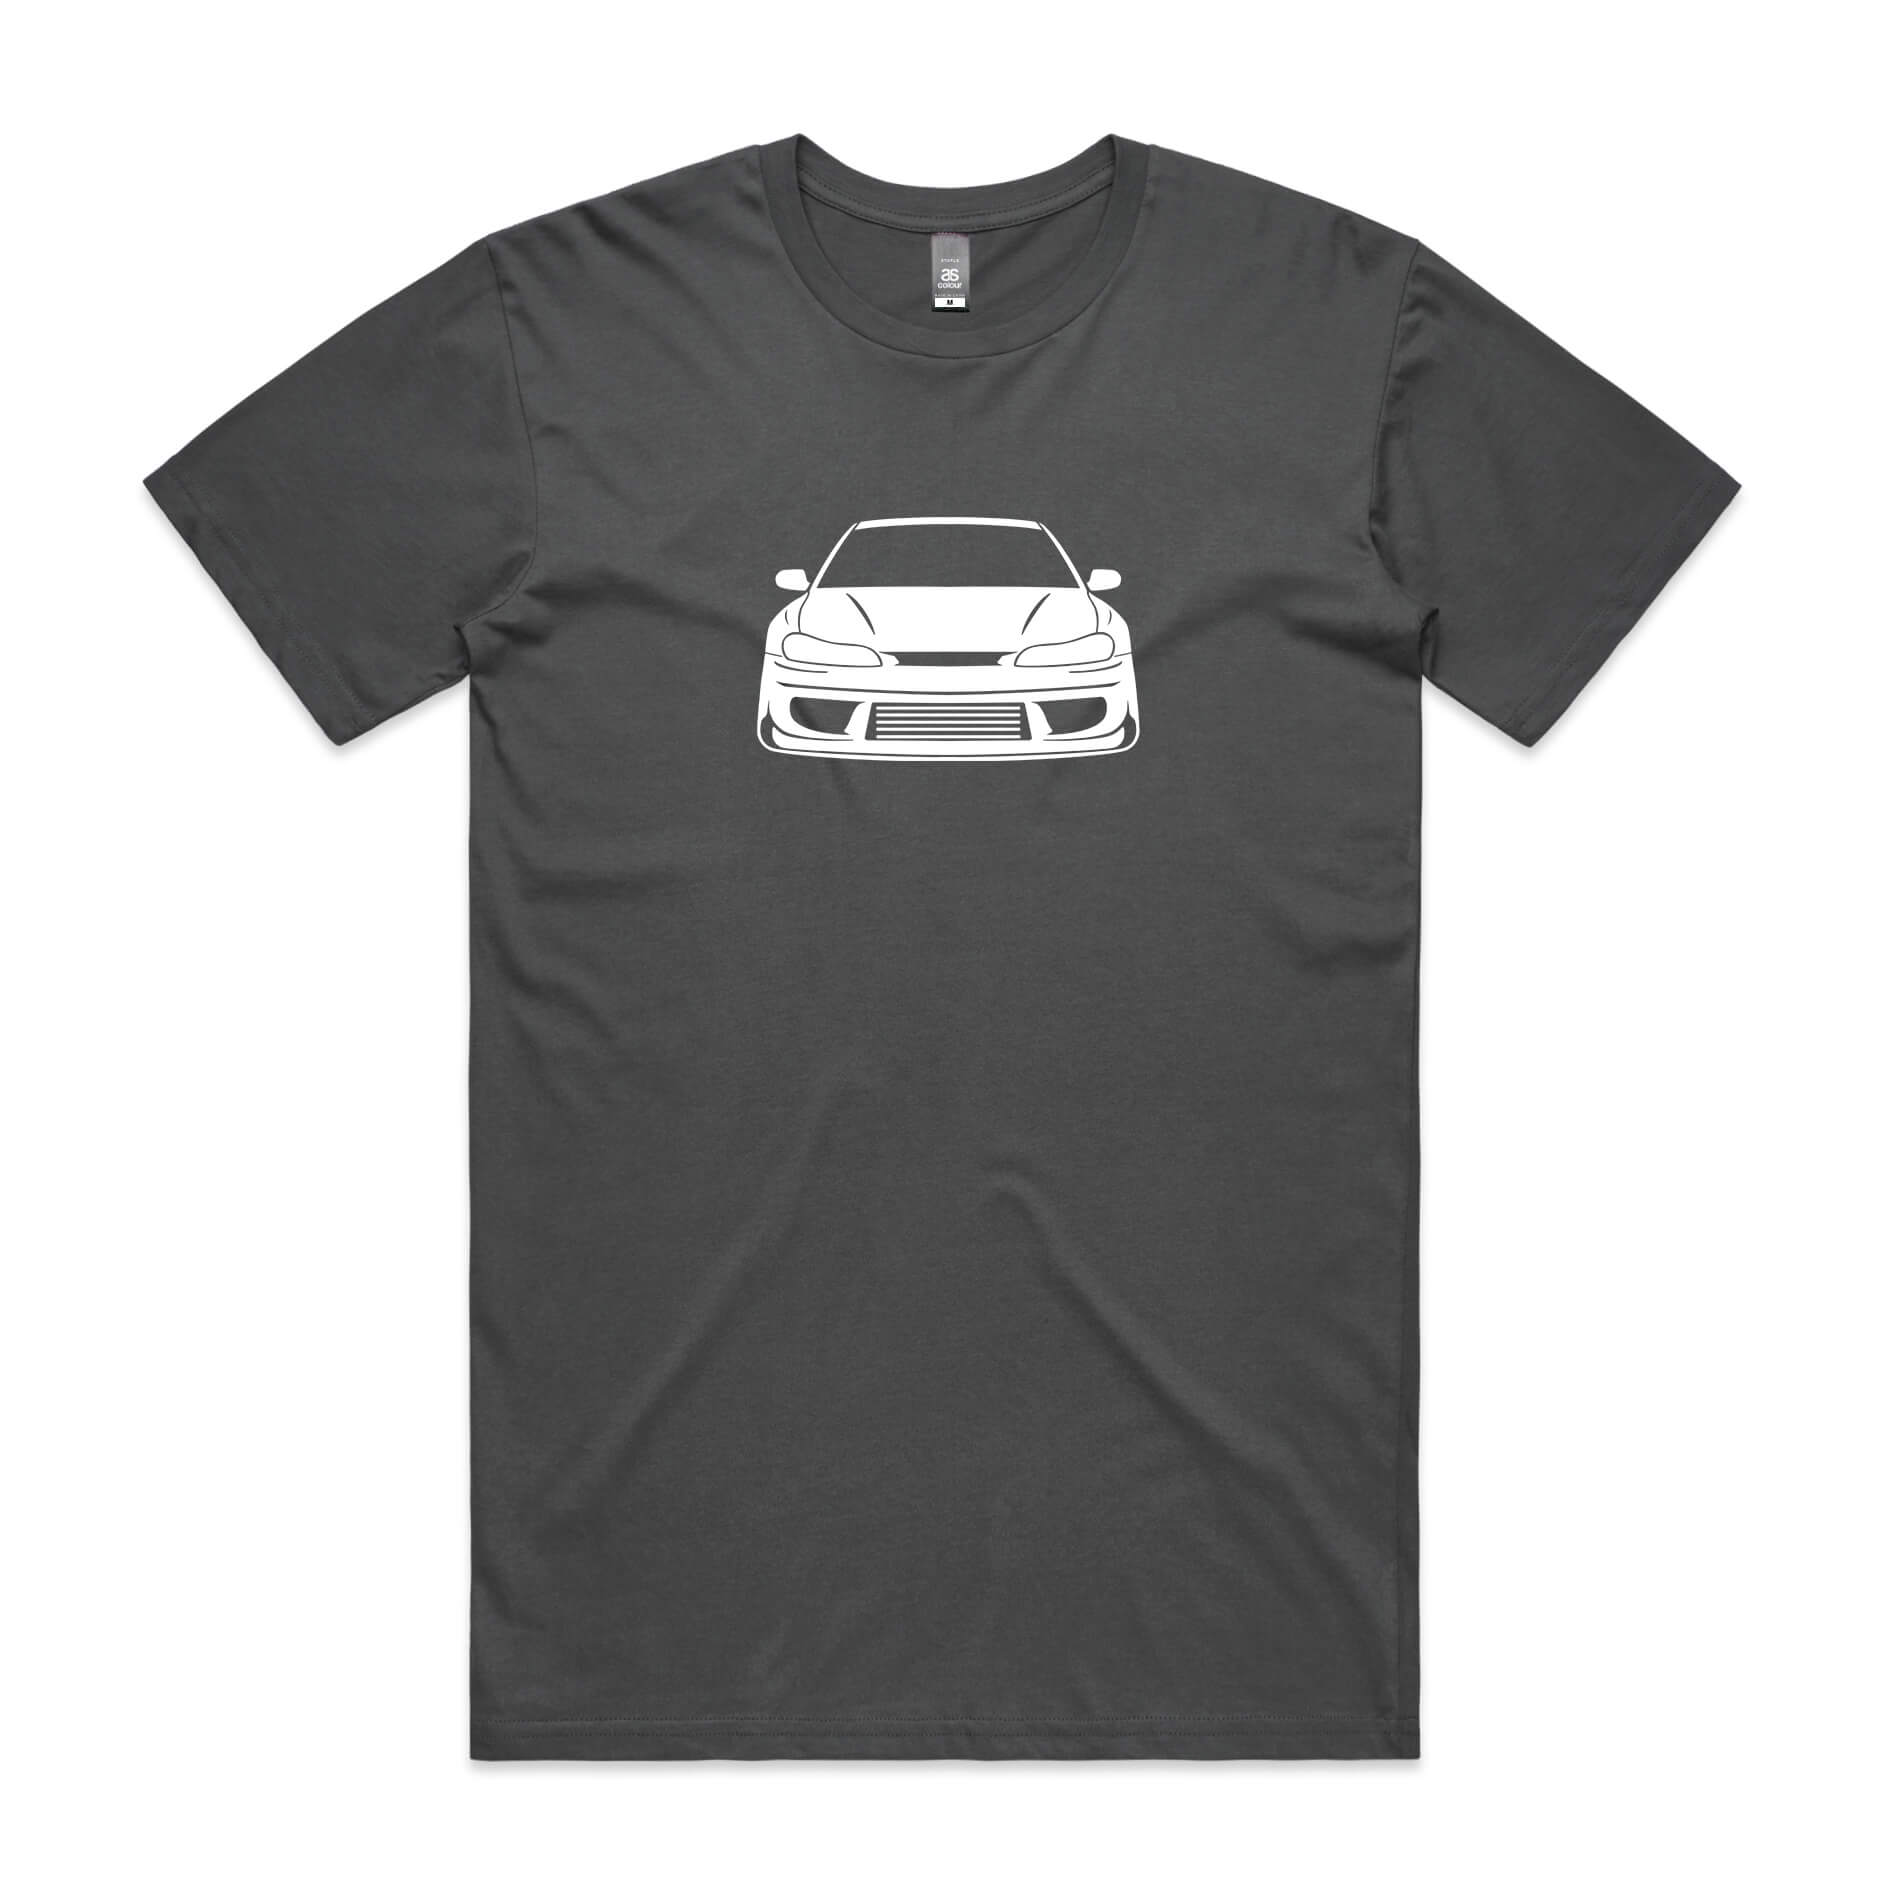 Nissan S15 Silvia t-shirt in charcoal grey